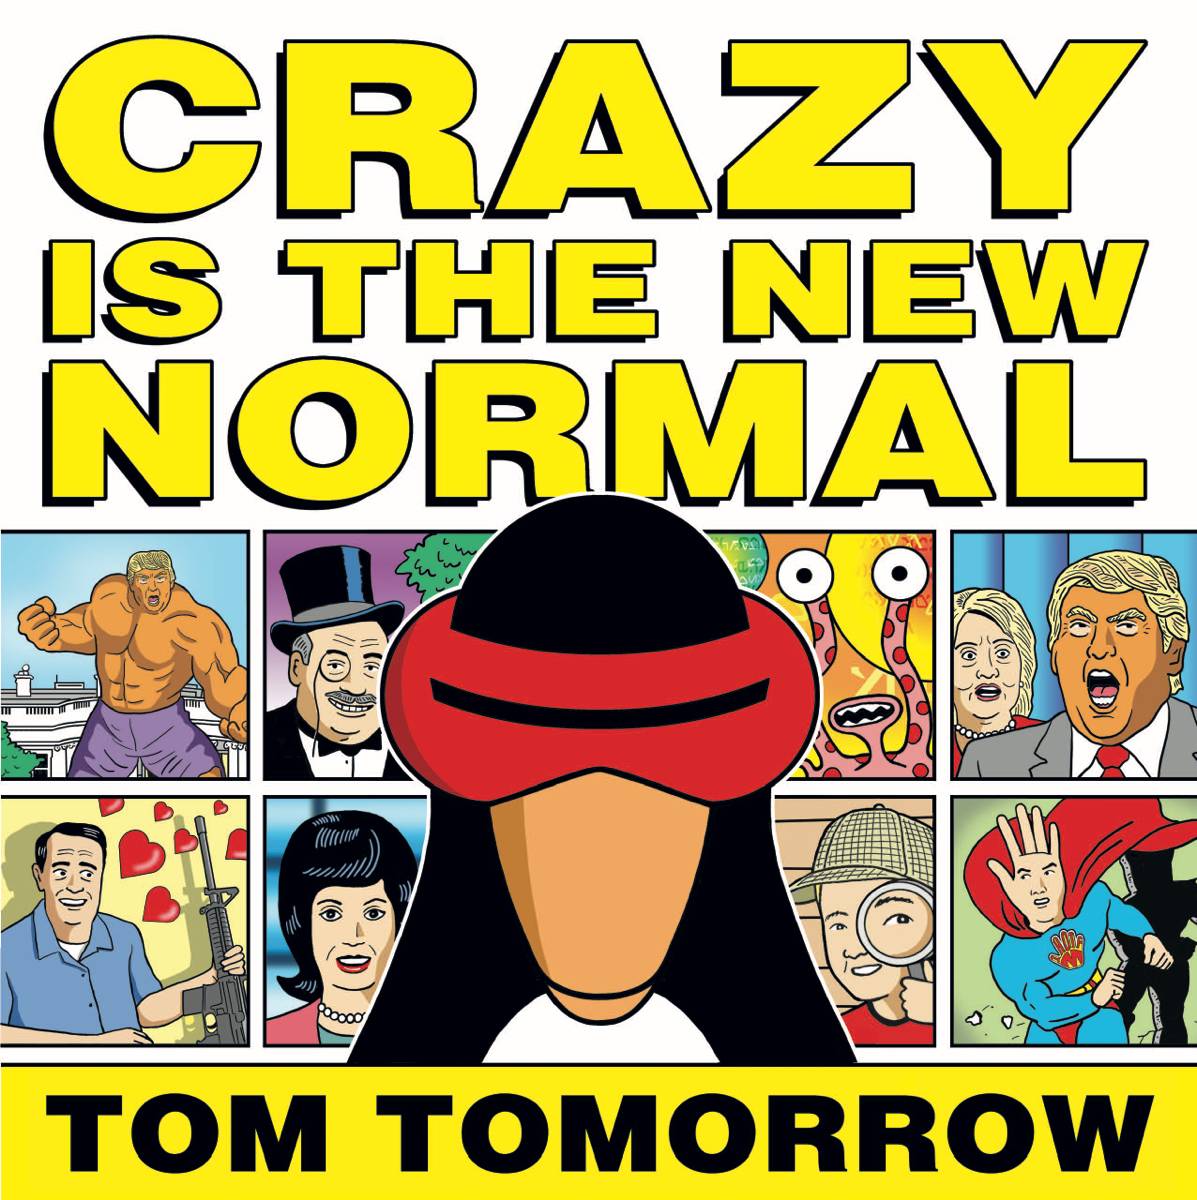 Crazy Is New Normal Tom Tomorrow Graphic Novel